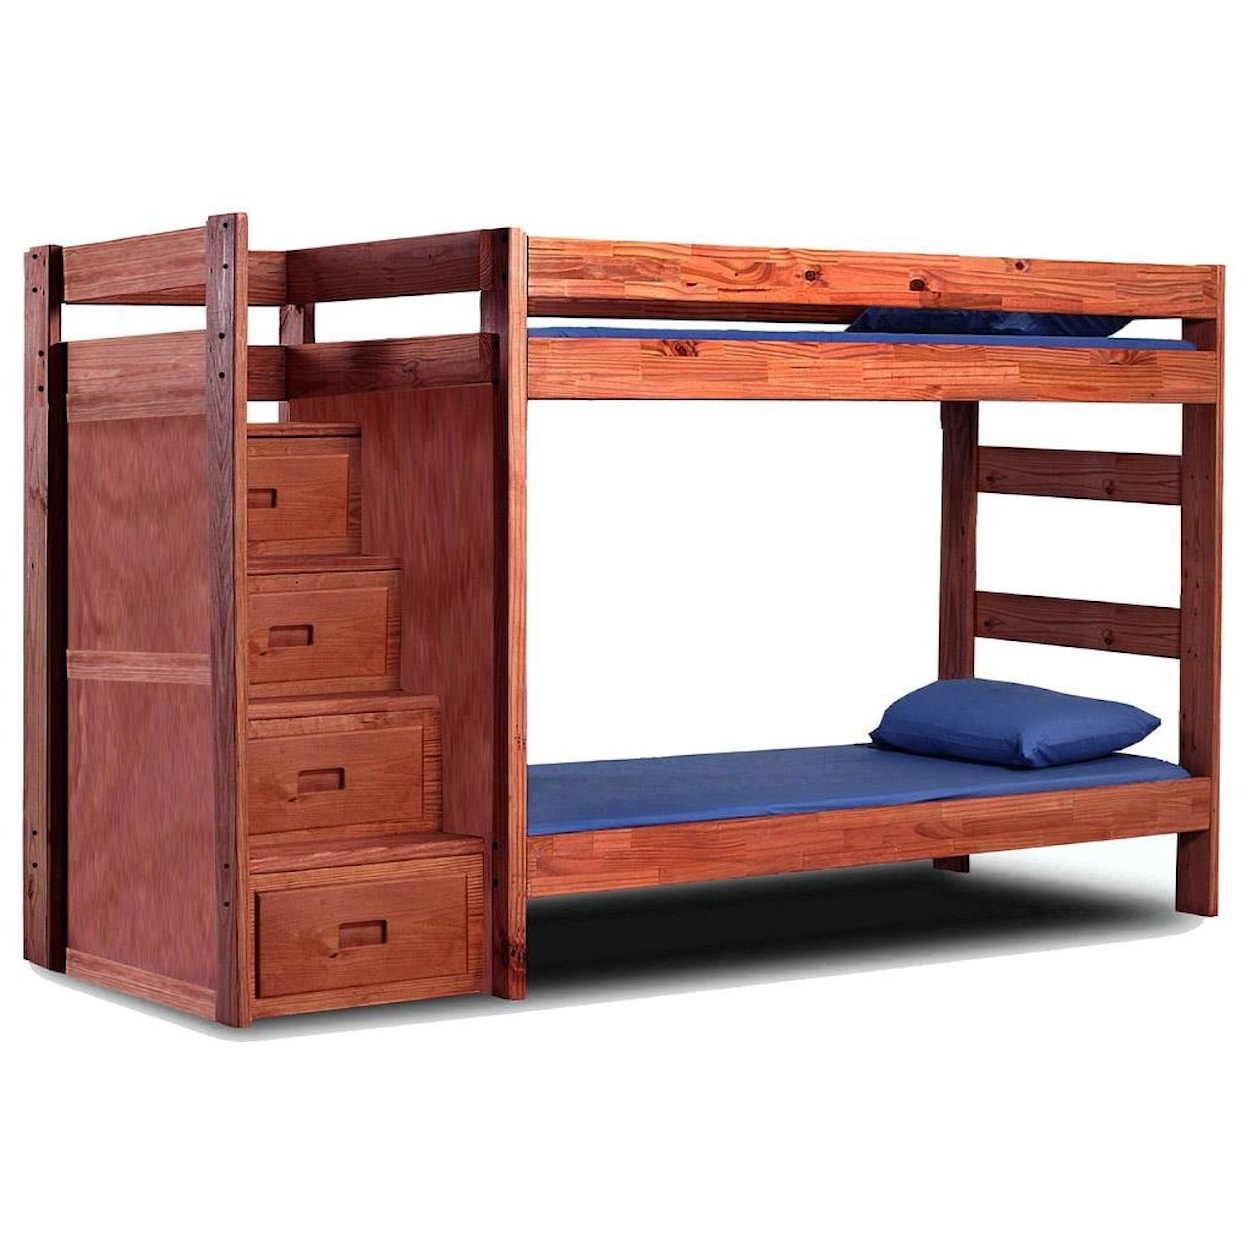 Pine Crafter 4000 Twin Staircase Bunk Bed